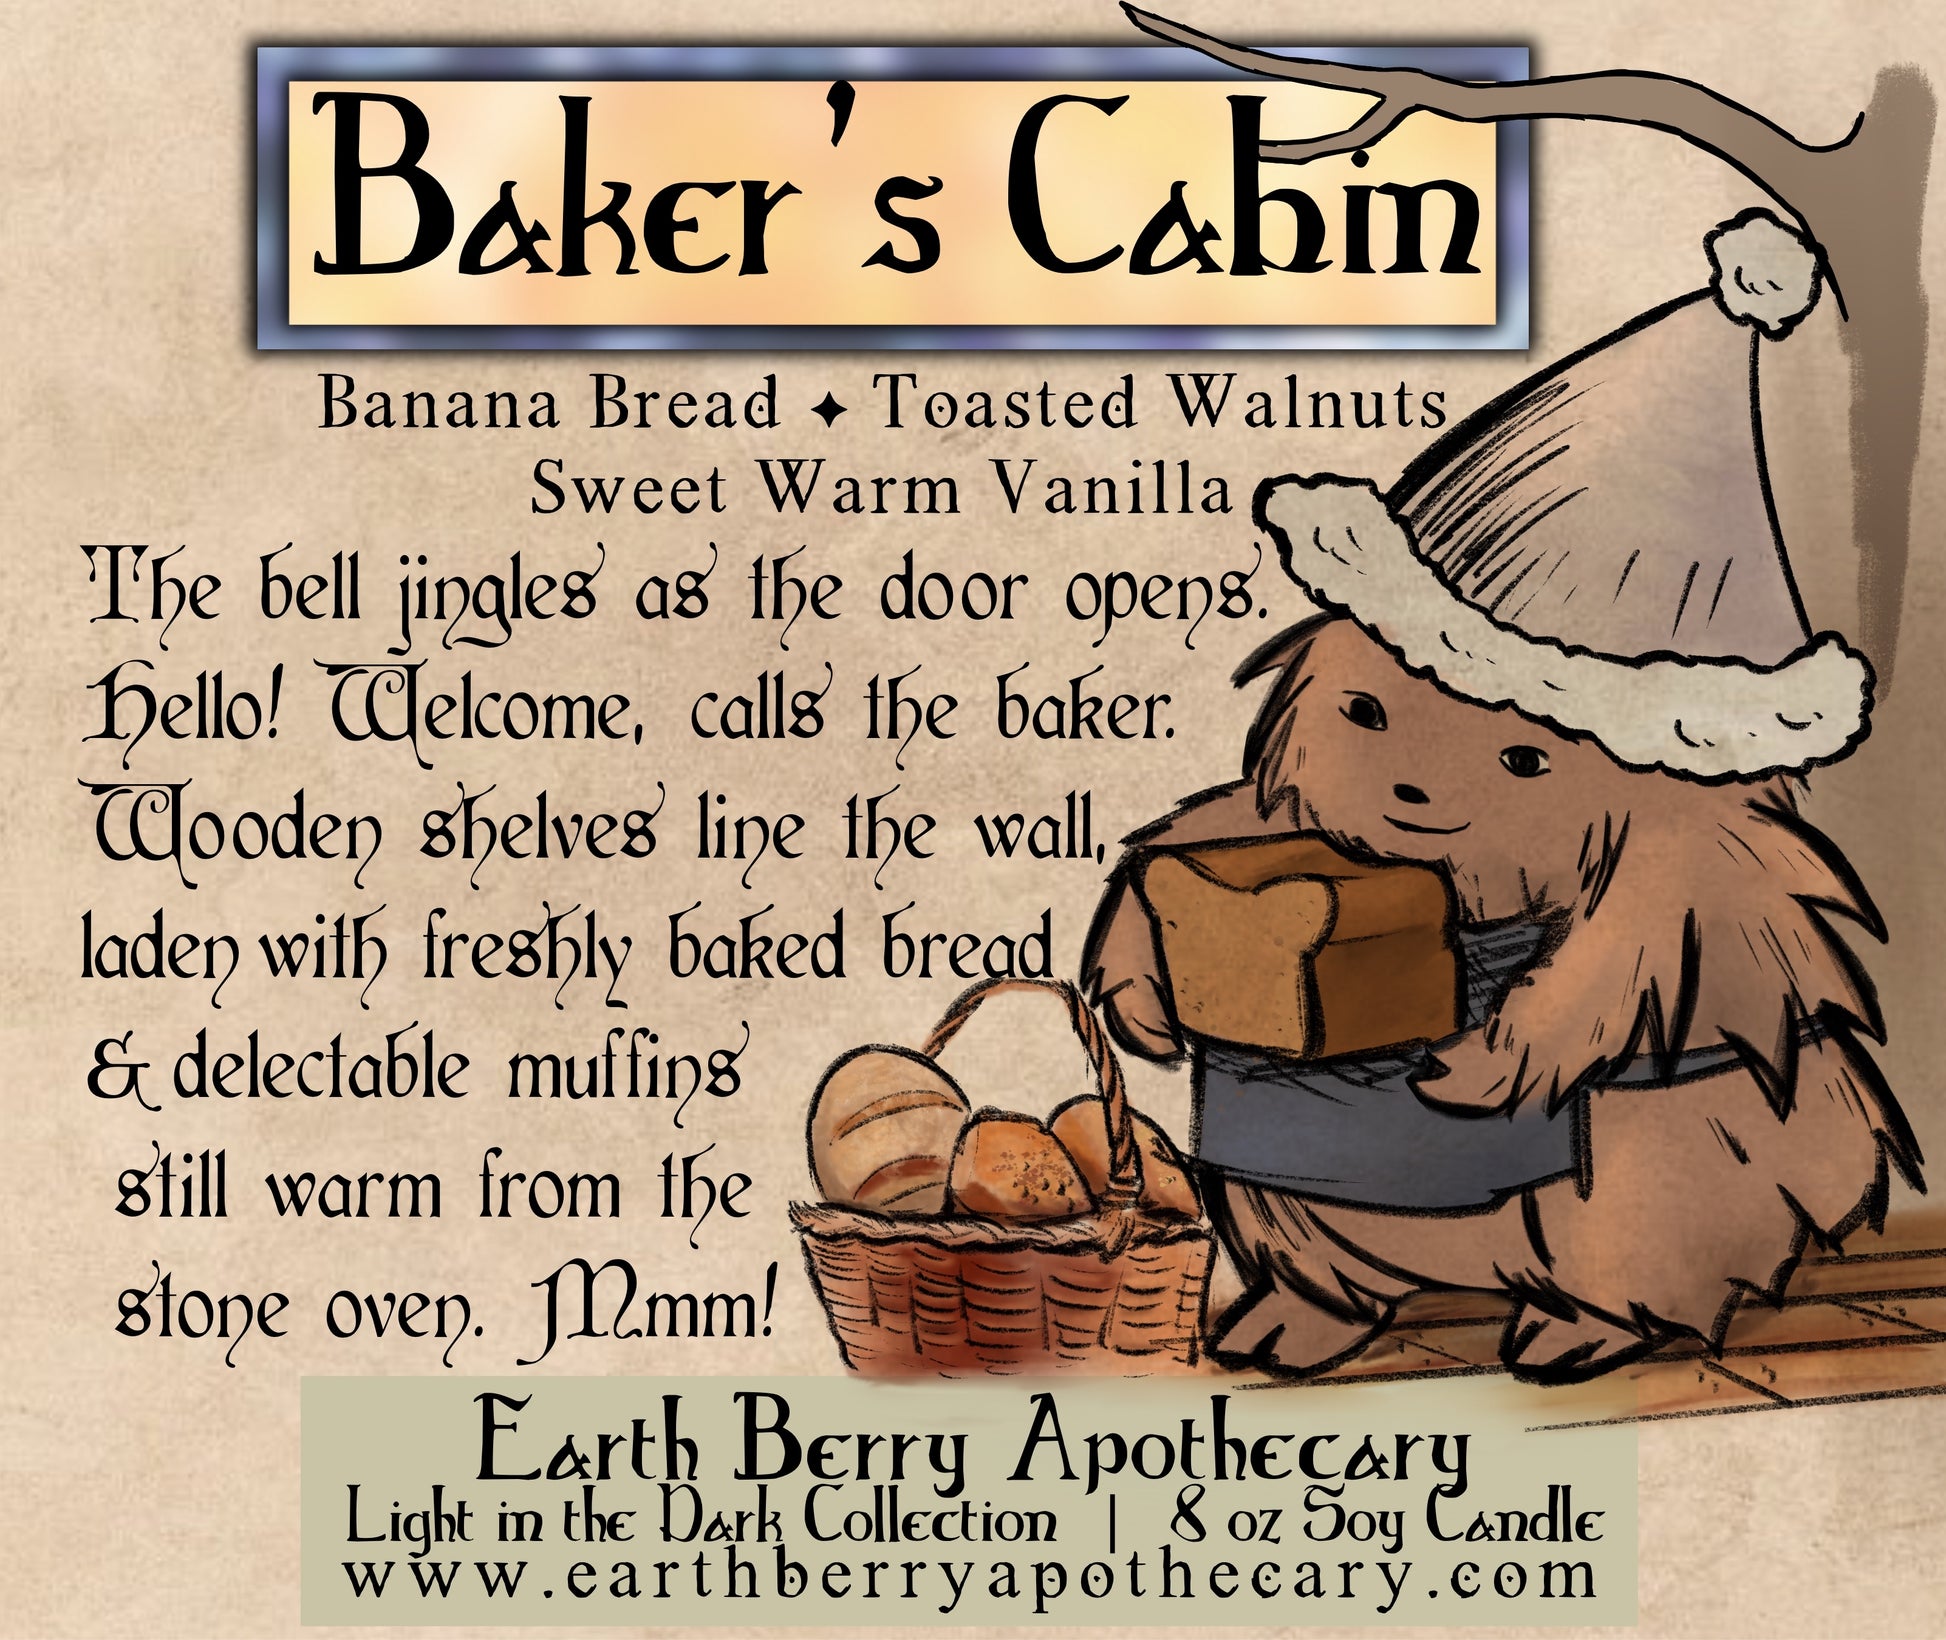 Baker's Cabin banana nut bread scented soy candle. Always clean burning and nontoxic.